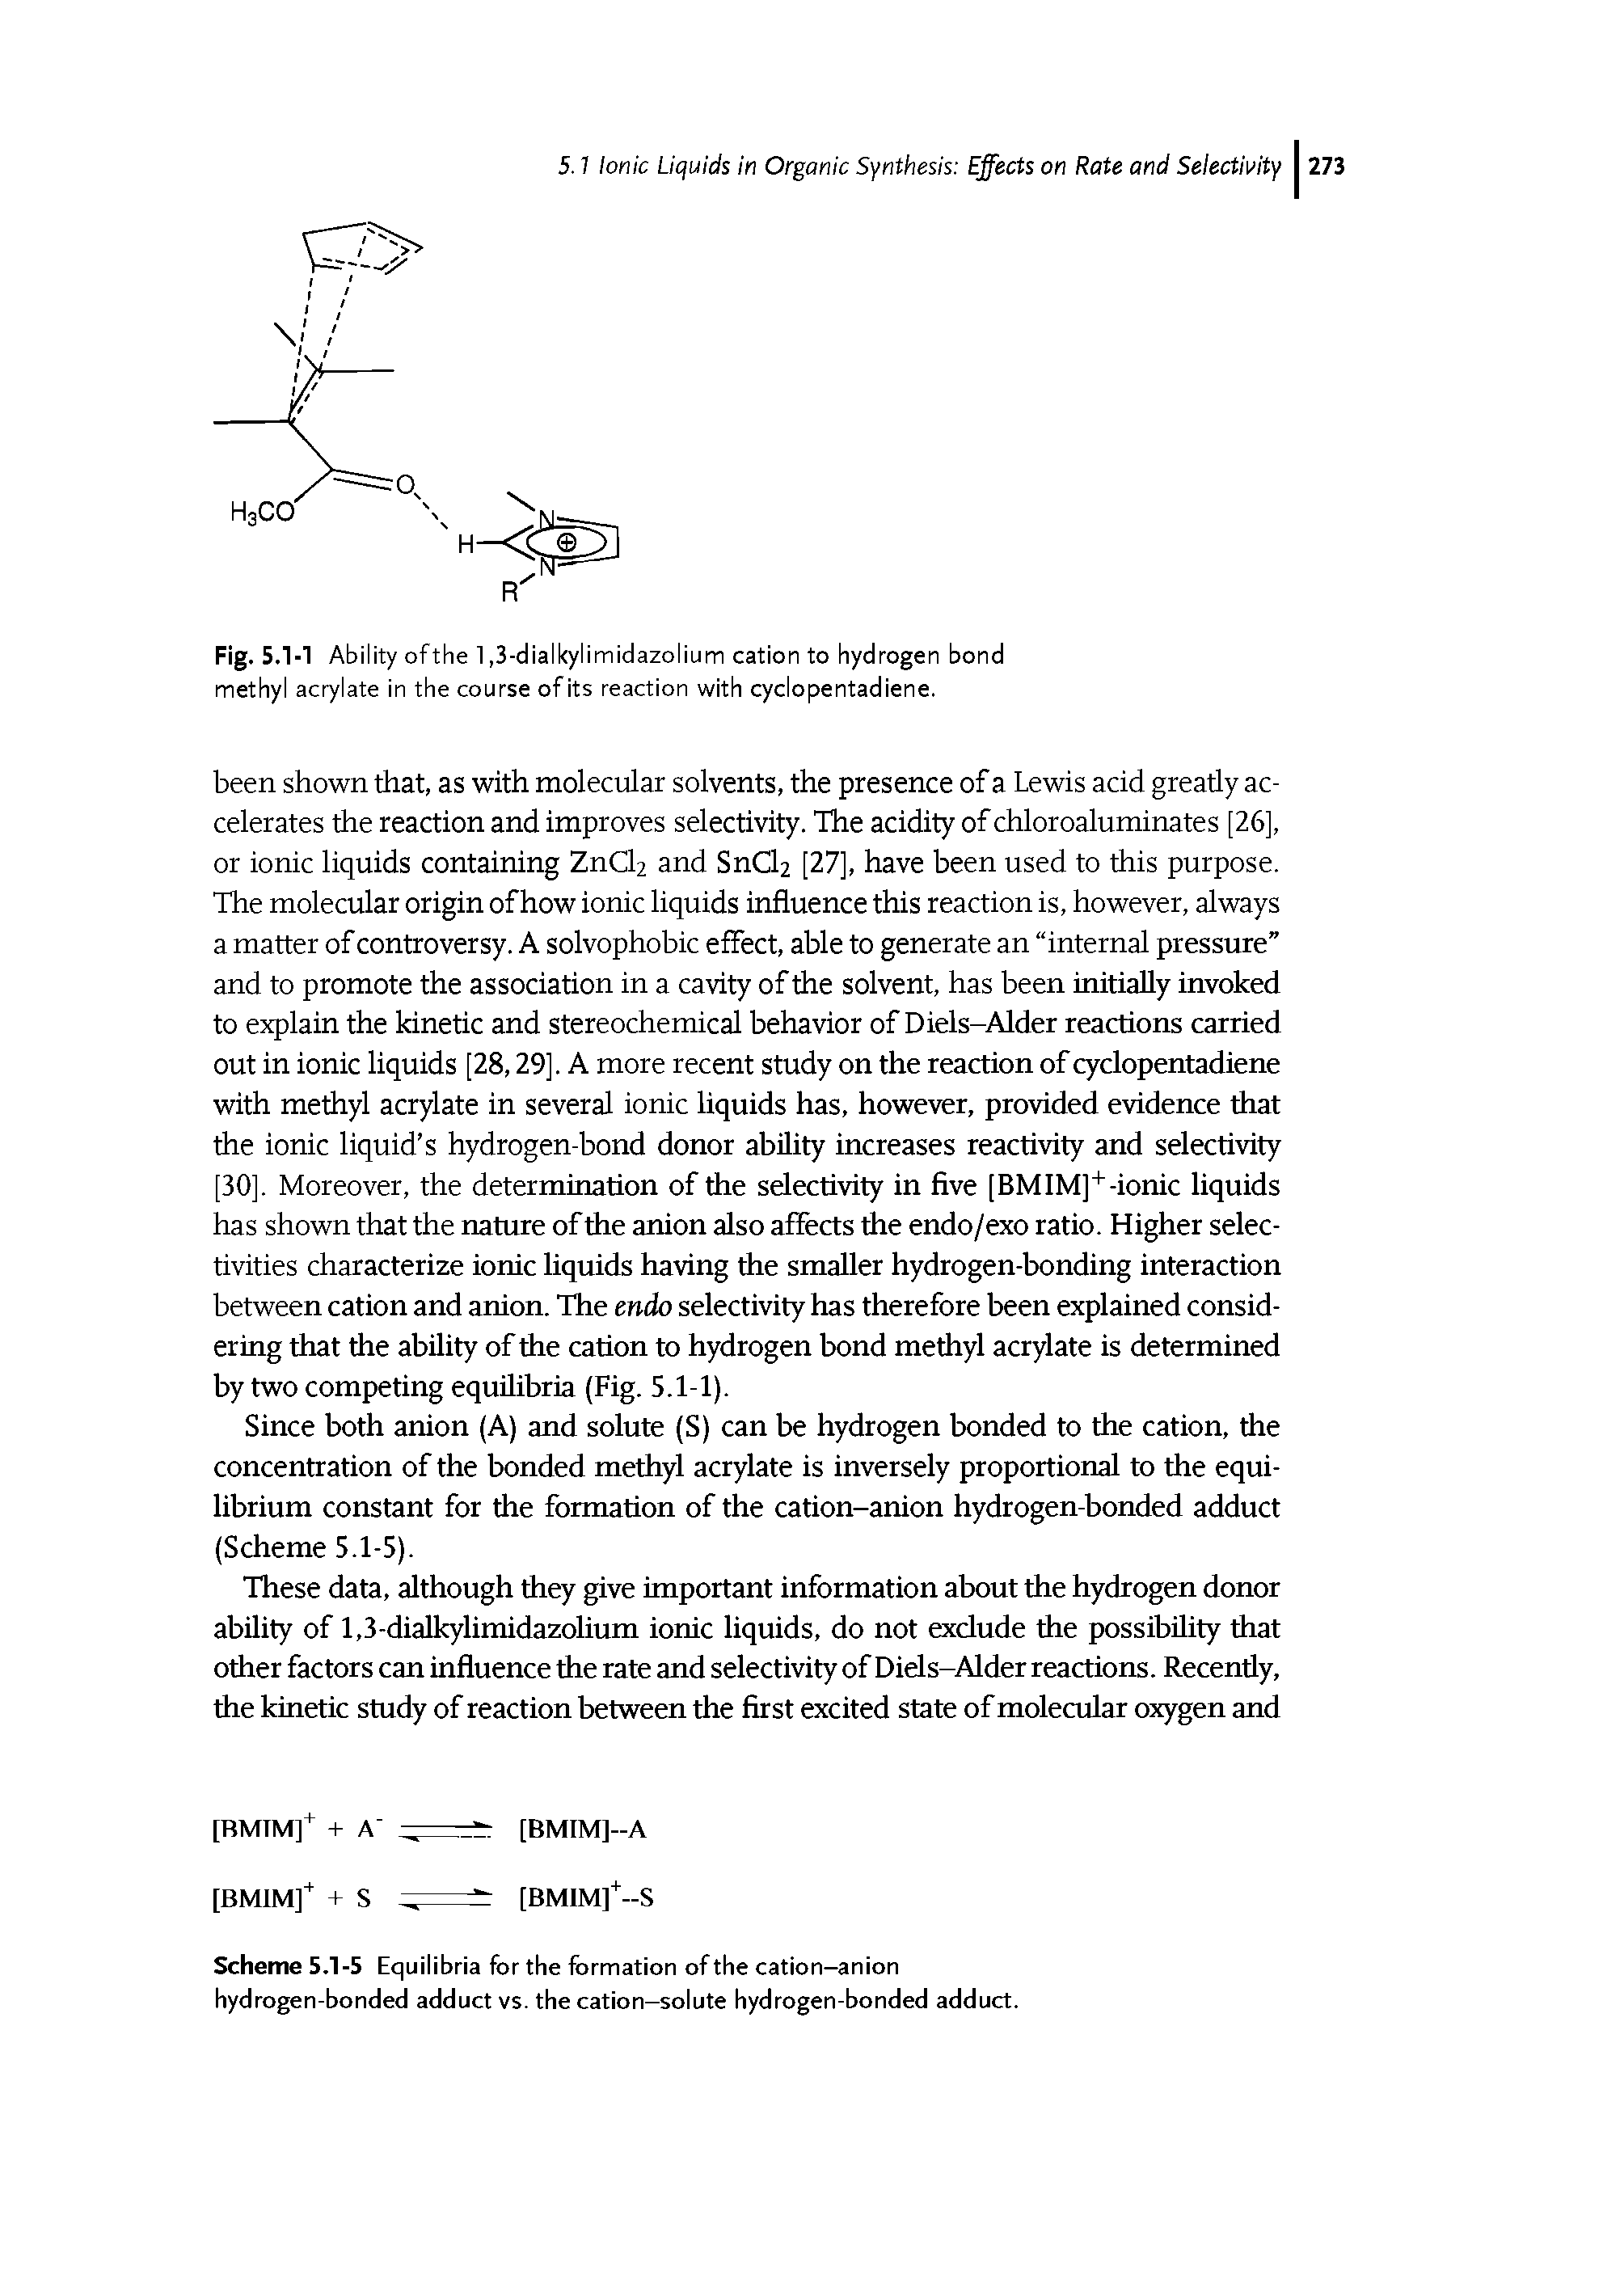 Fig. 5.M Ability ofthe 1,3-dialkylimidazolium cation to hydrogen bond methyl acrylate in the course of its reaction with cyclopentadiene.